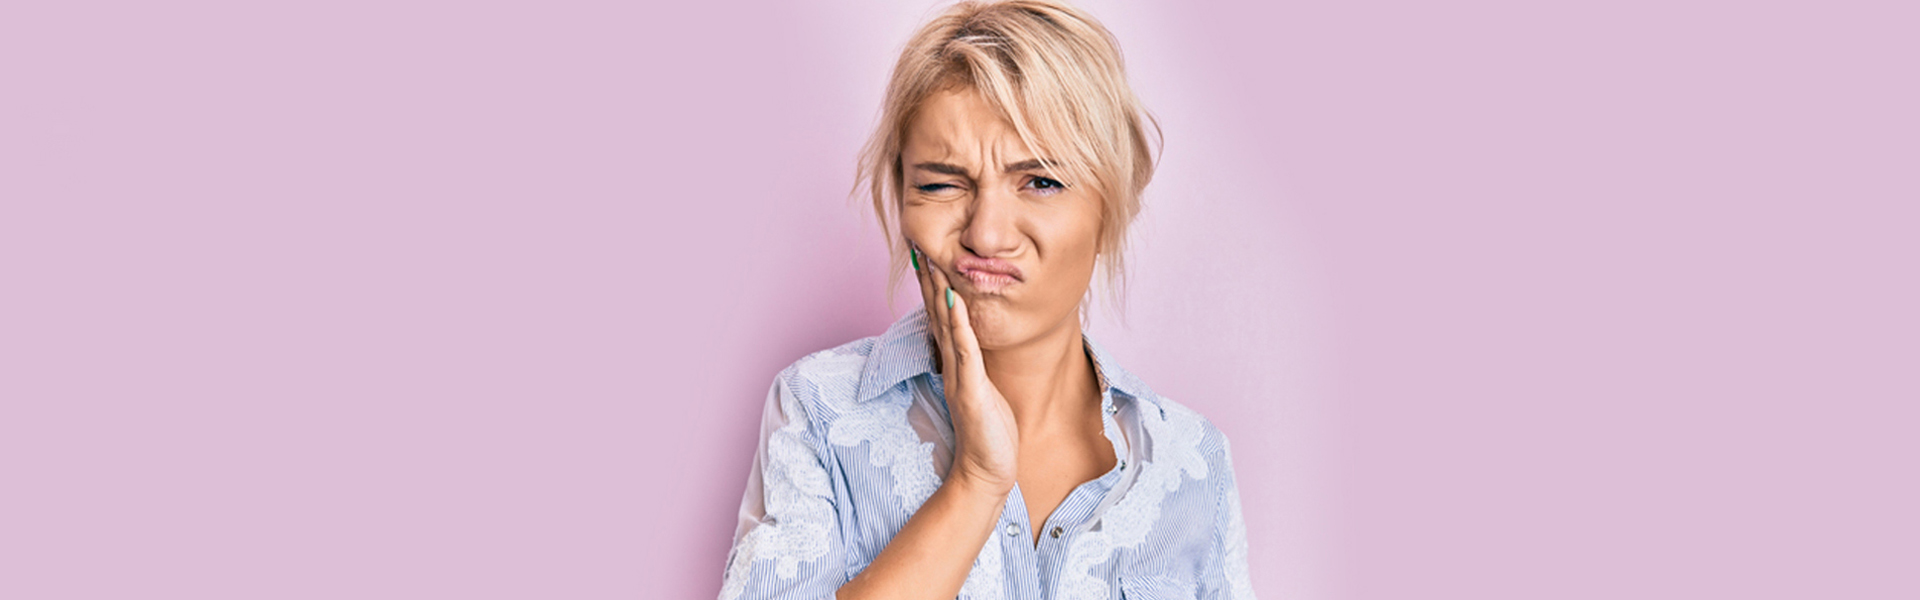 What are the most common causes of dental emergencies, and how can they be avoided